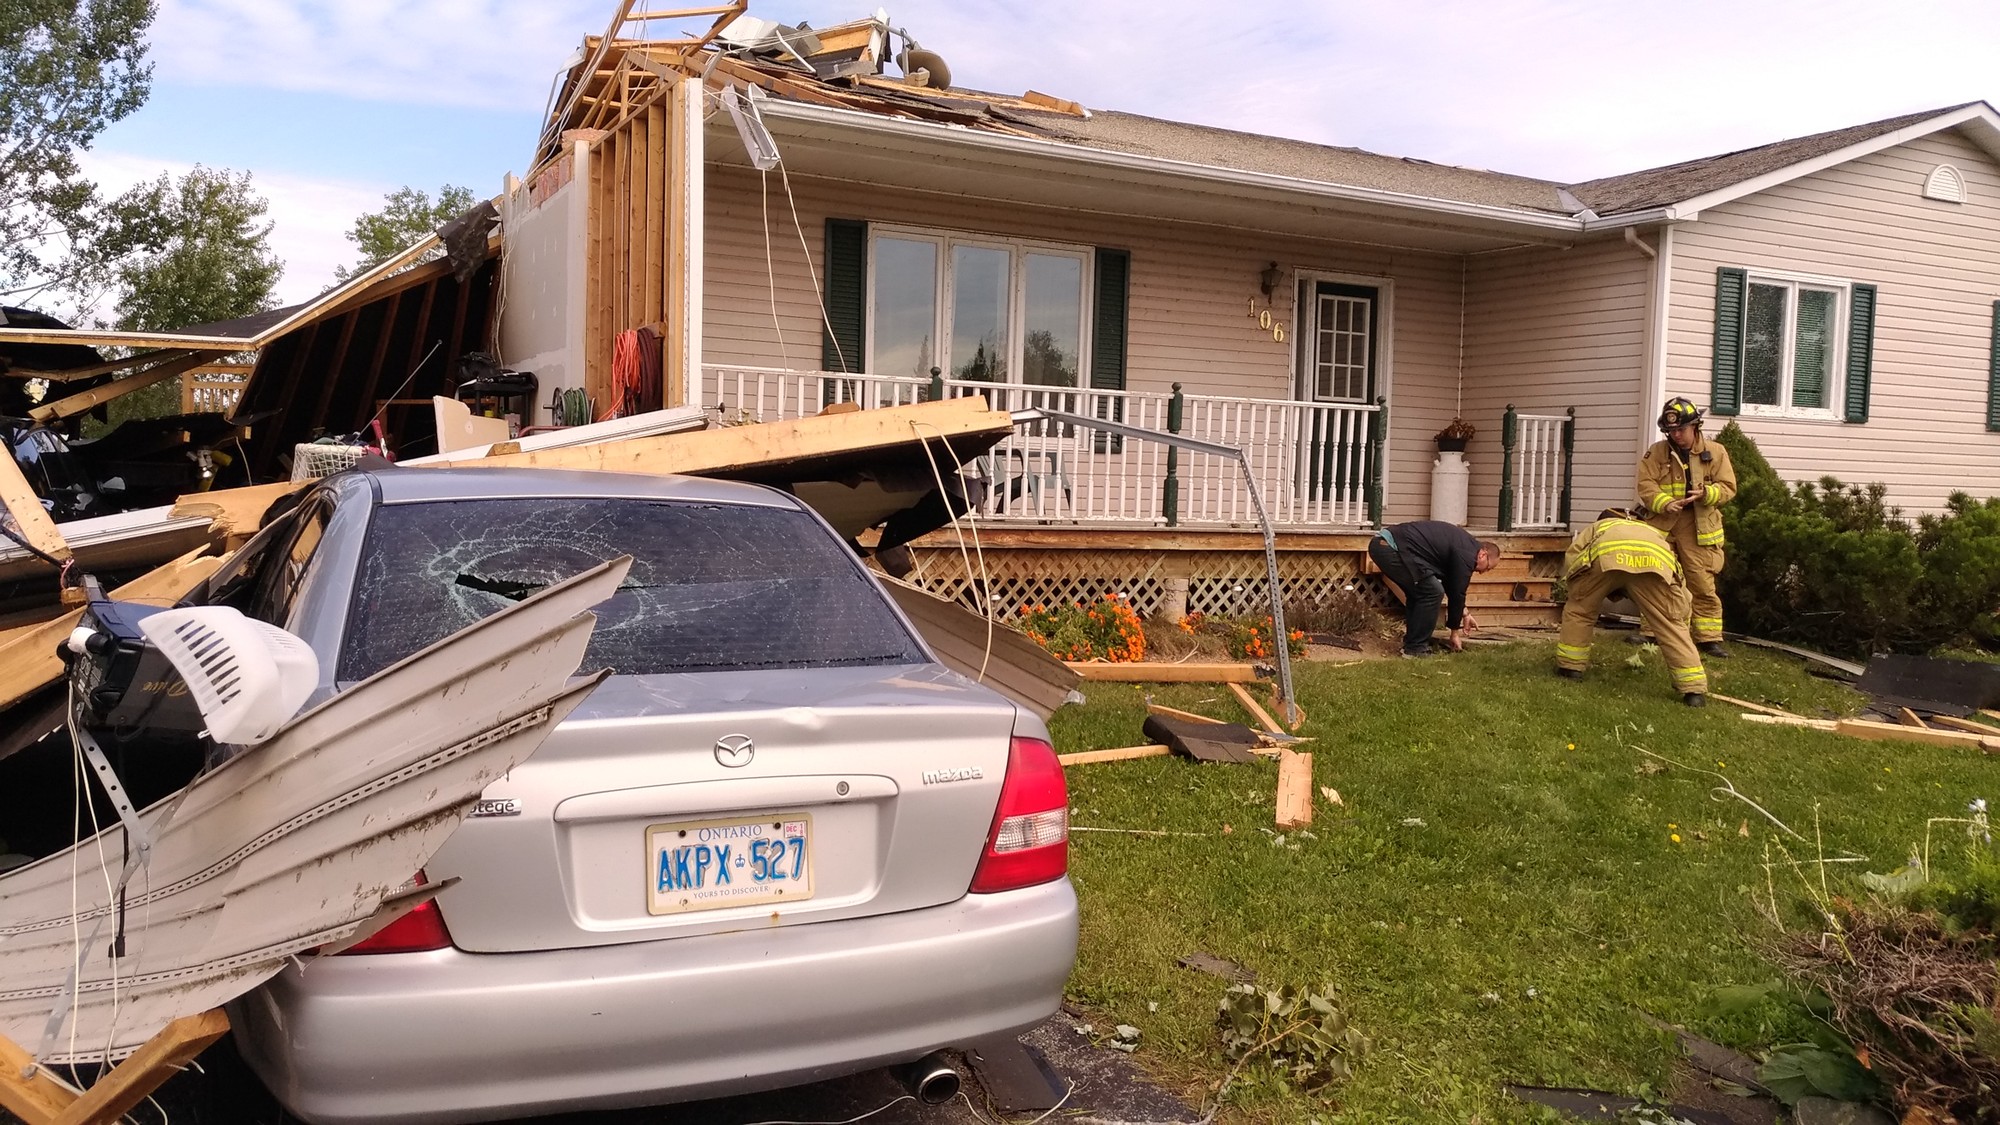 Volunteer firefighters escorting families into damaged homes to collect personal items a few days after the tornado in Dunrobin.